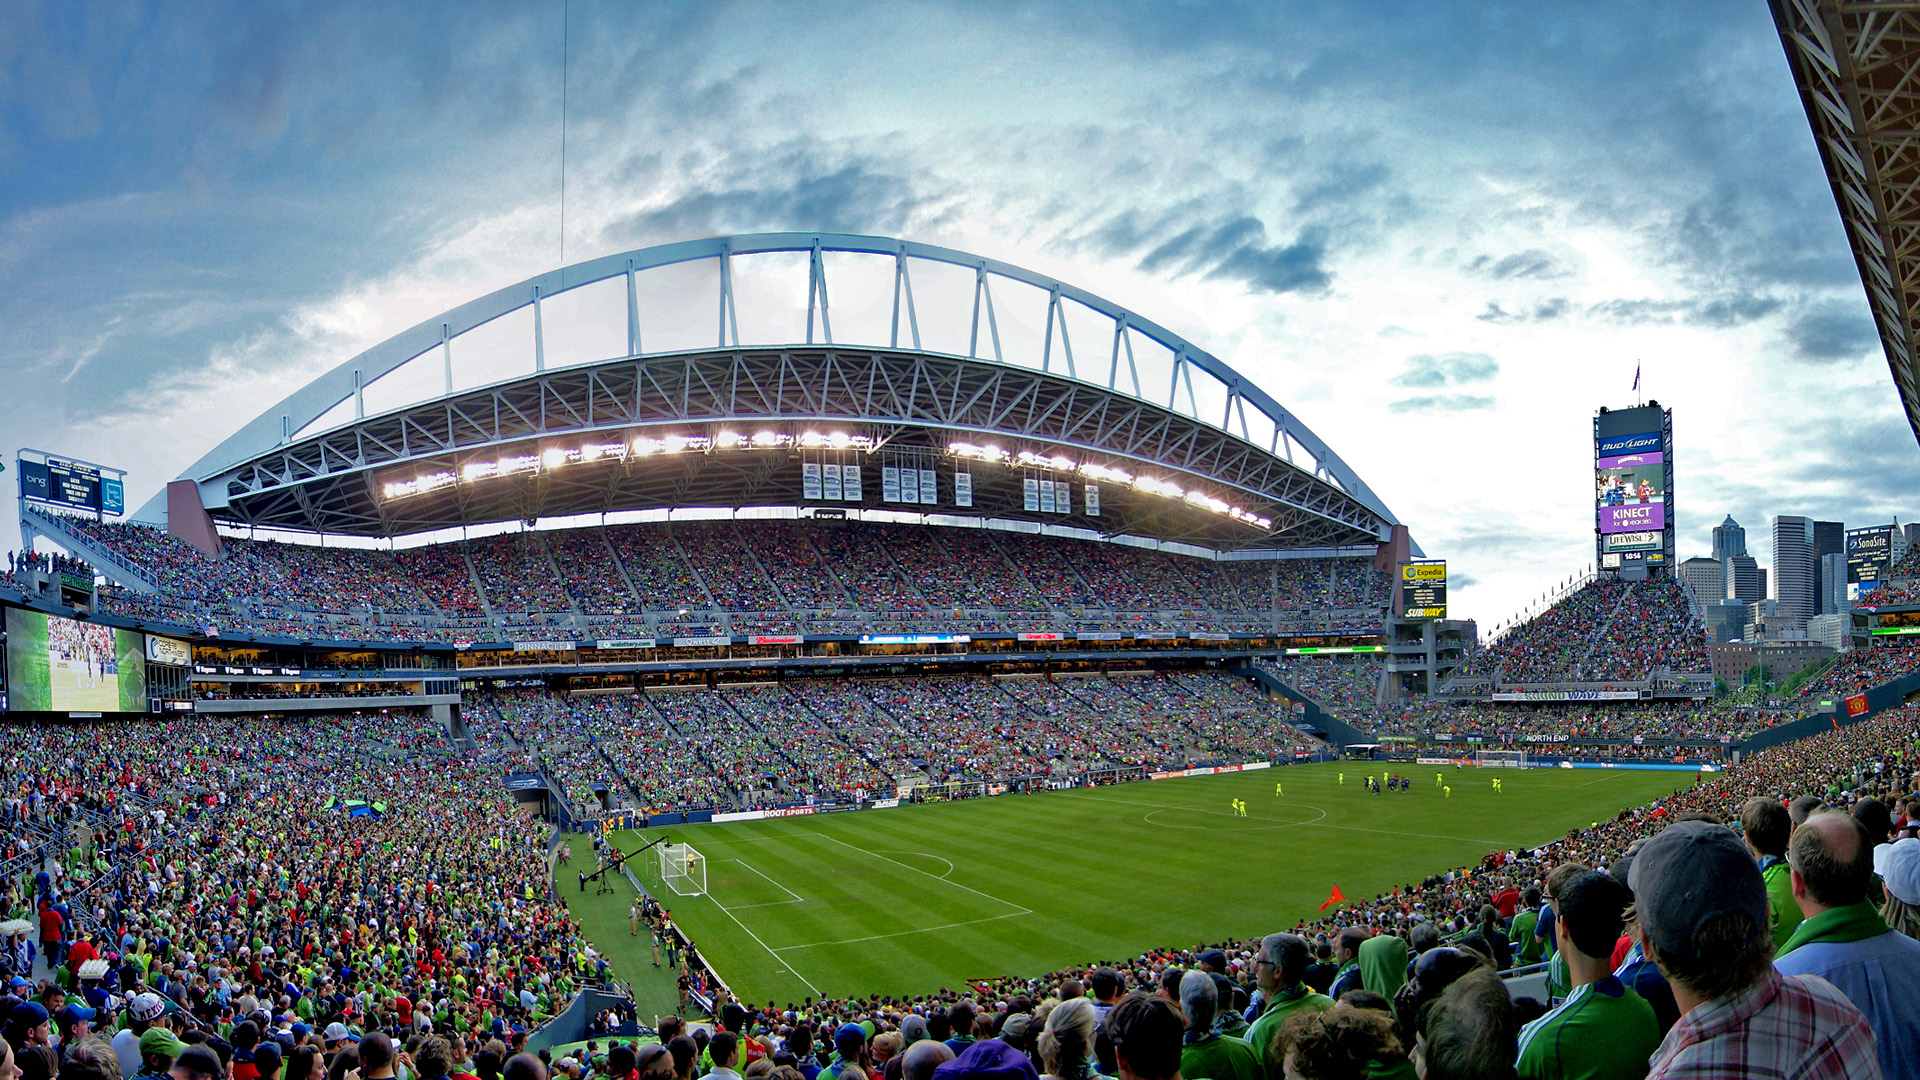 Seattle Sounders Fc HD Wallpapers And Photos download